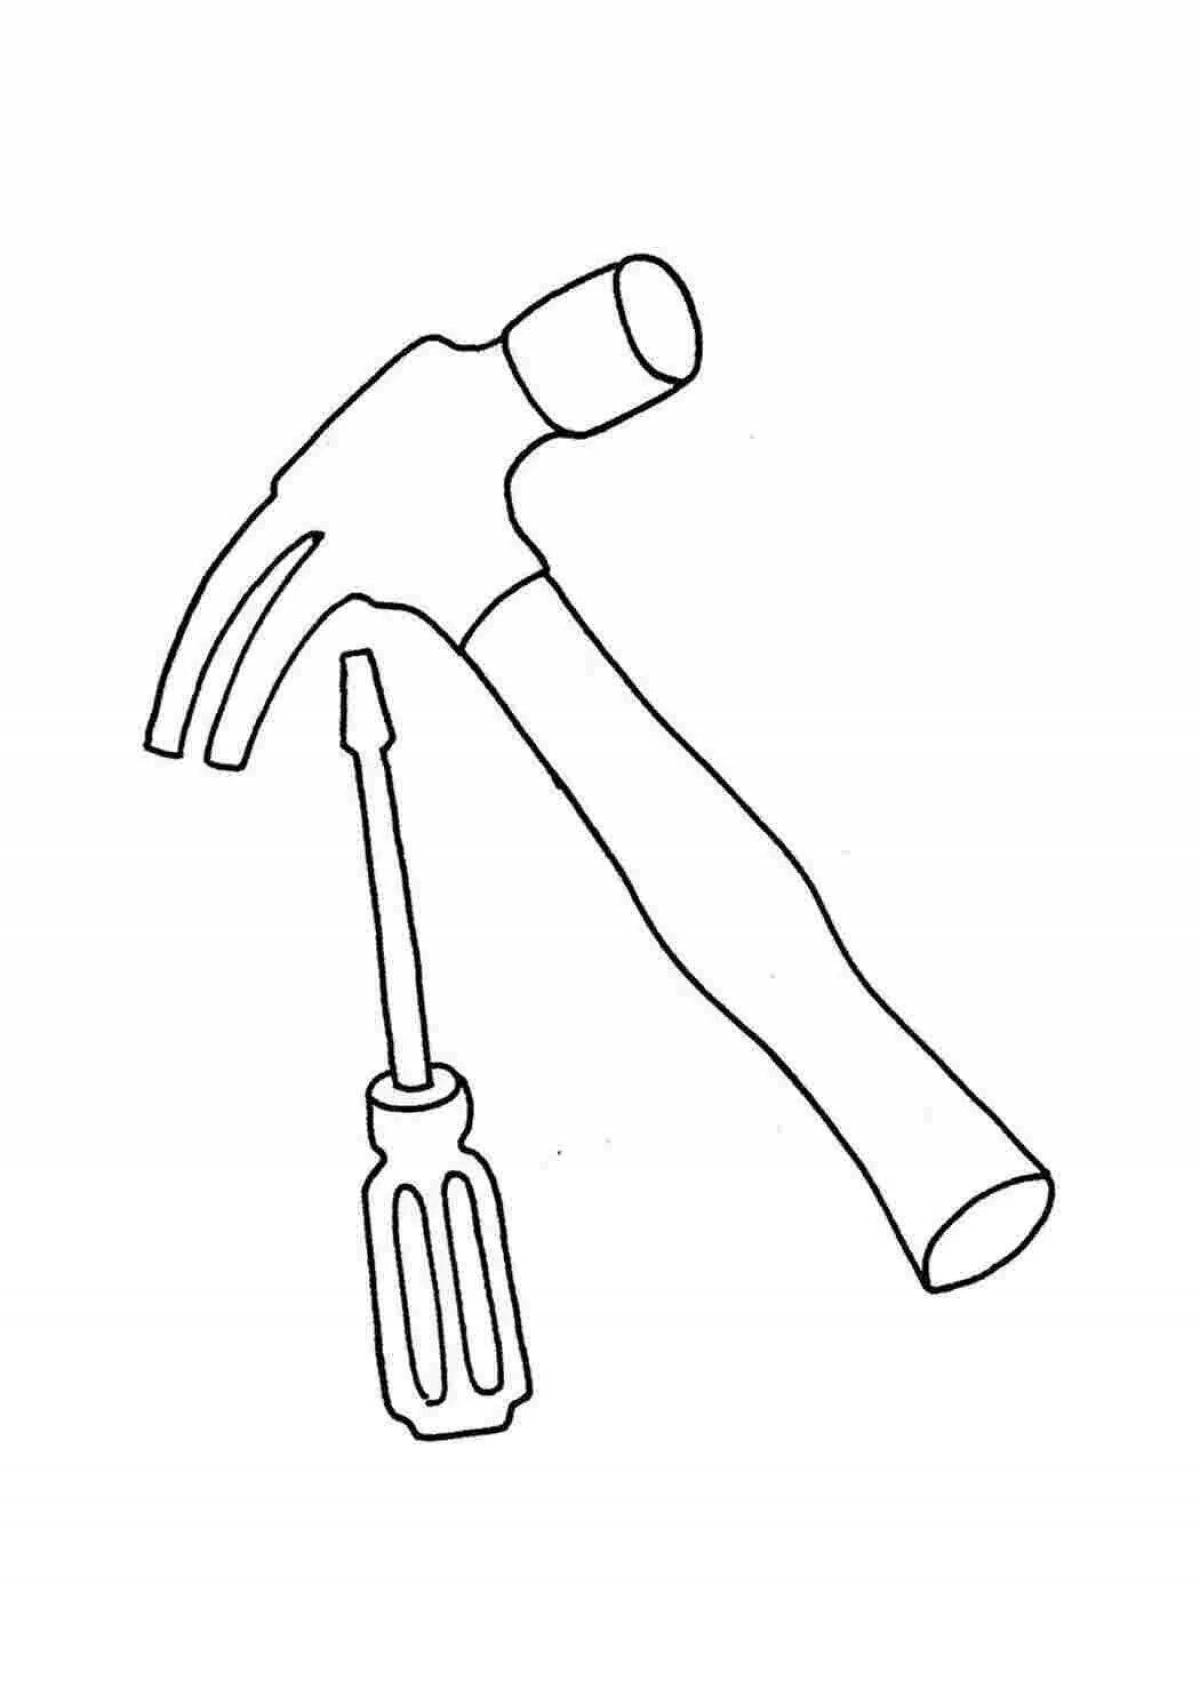 Shining hammer coloring page for minors